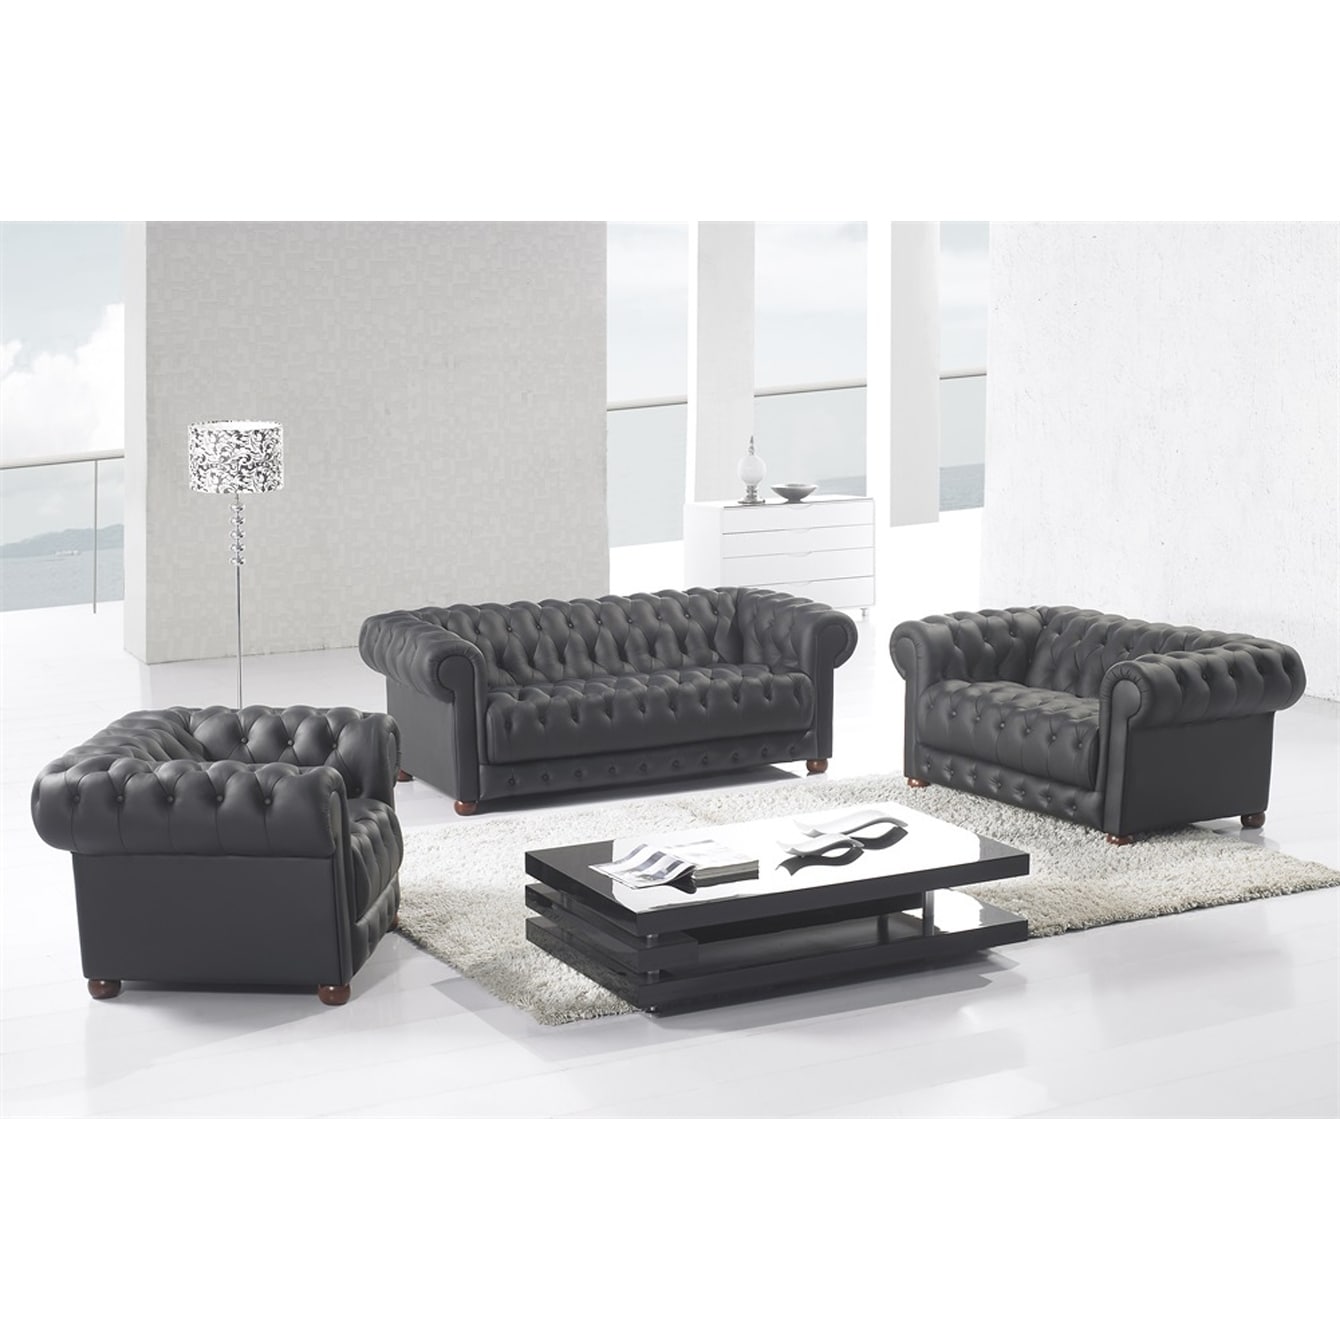 Matte Black Modern Contemporary Real Leather Configurable Living Room Furniture Set With Sofa Loveseat And Chair Overstock 24239956 Brown